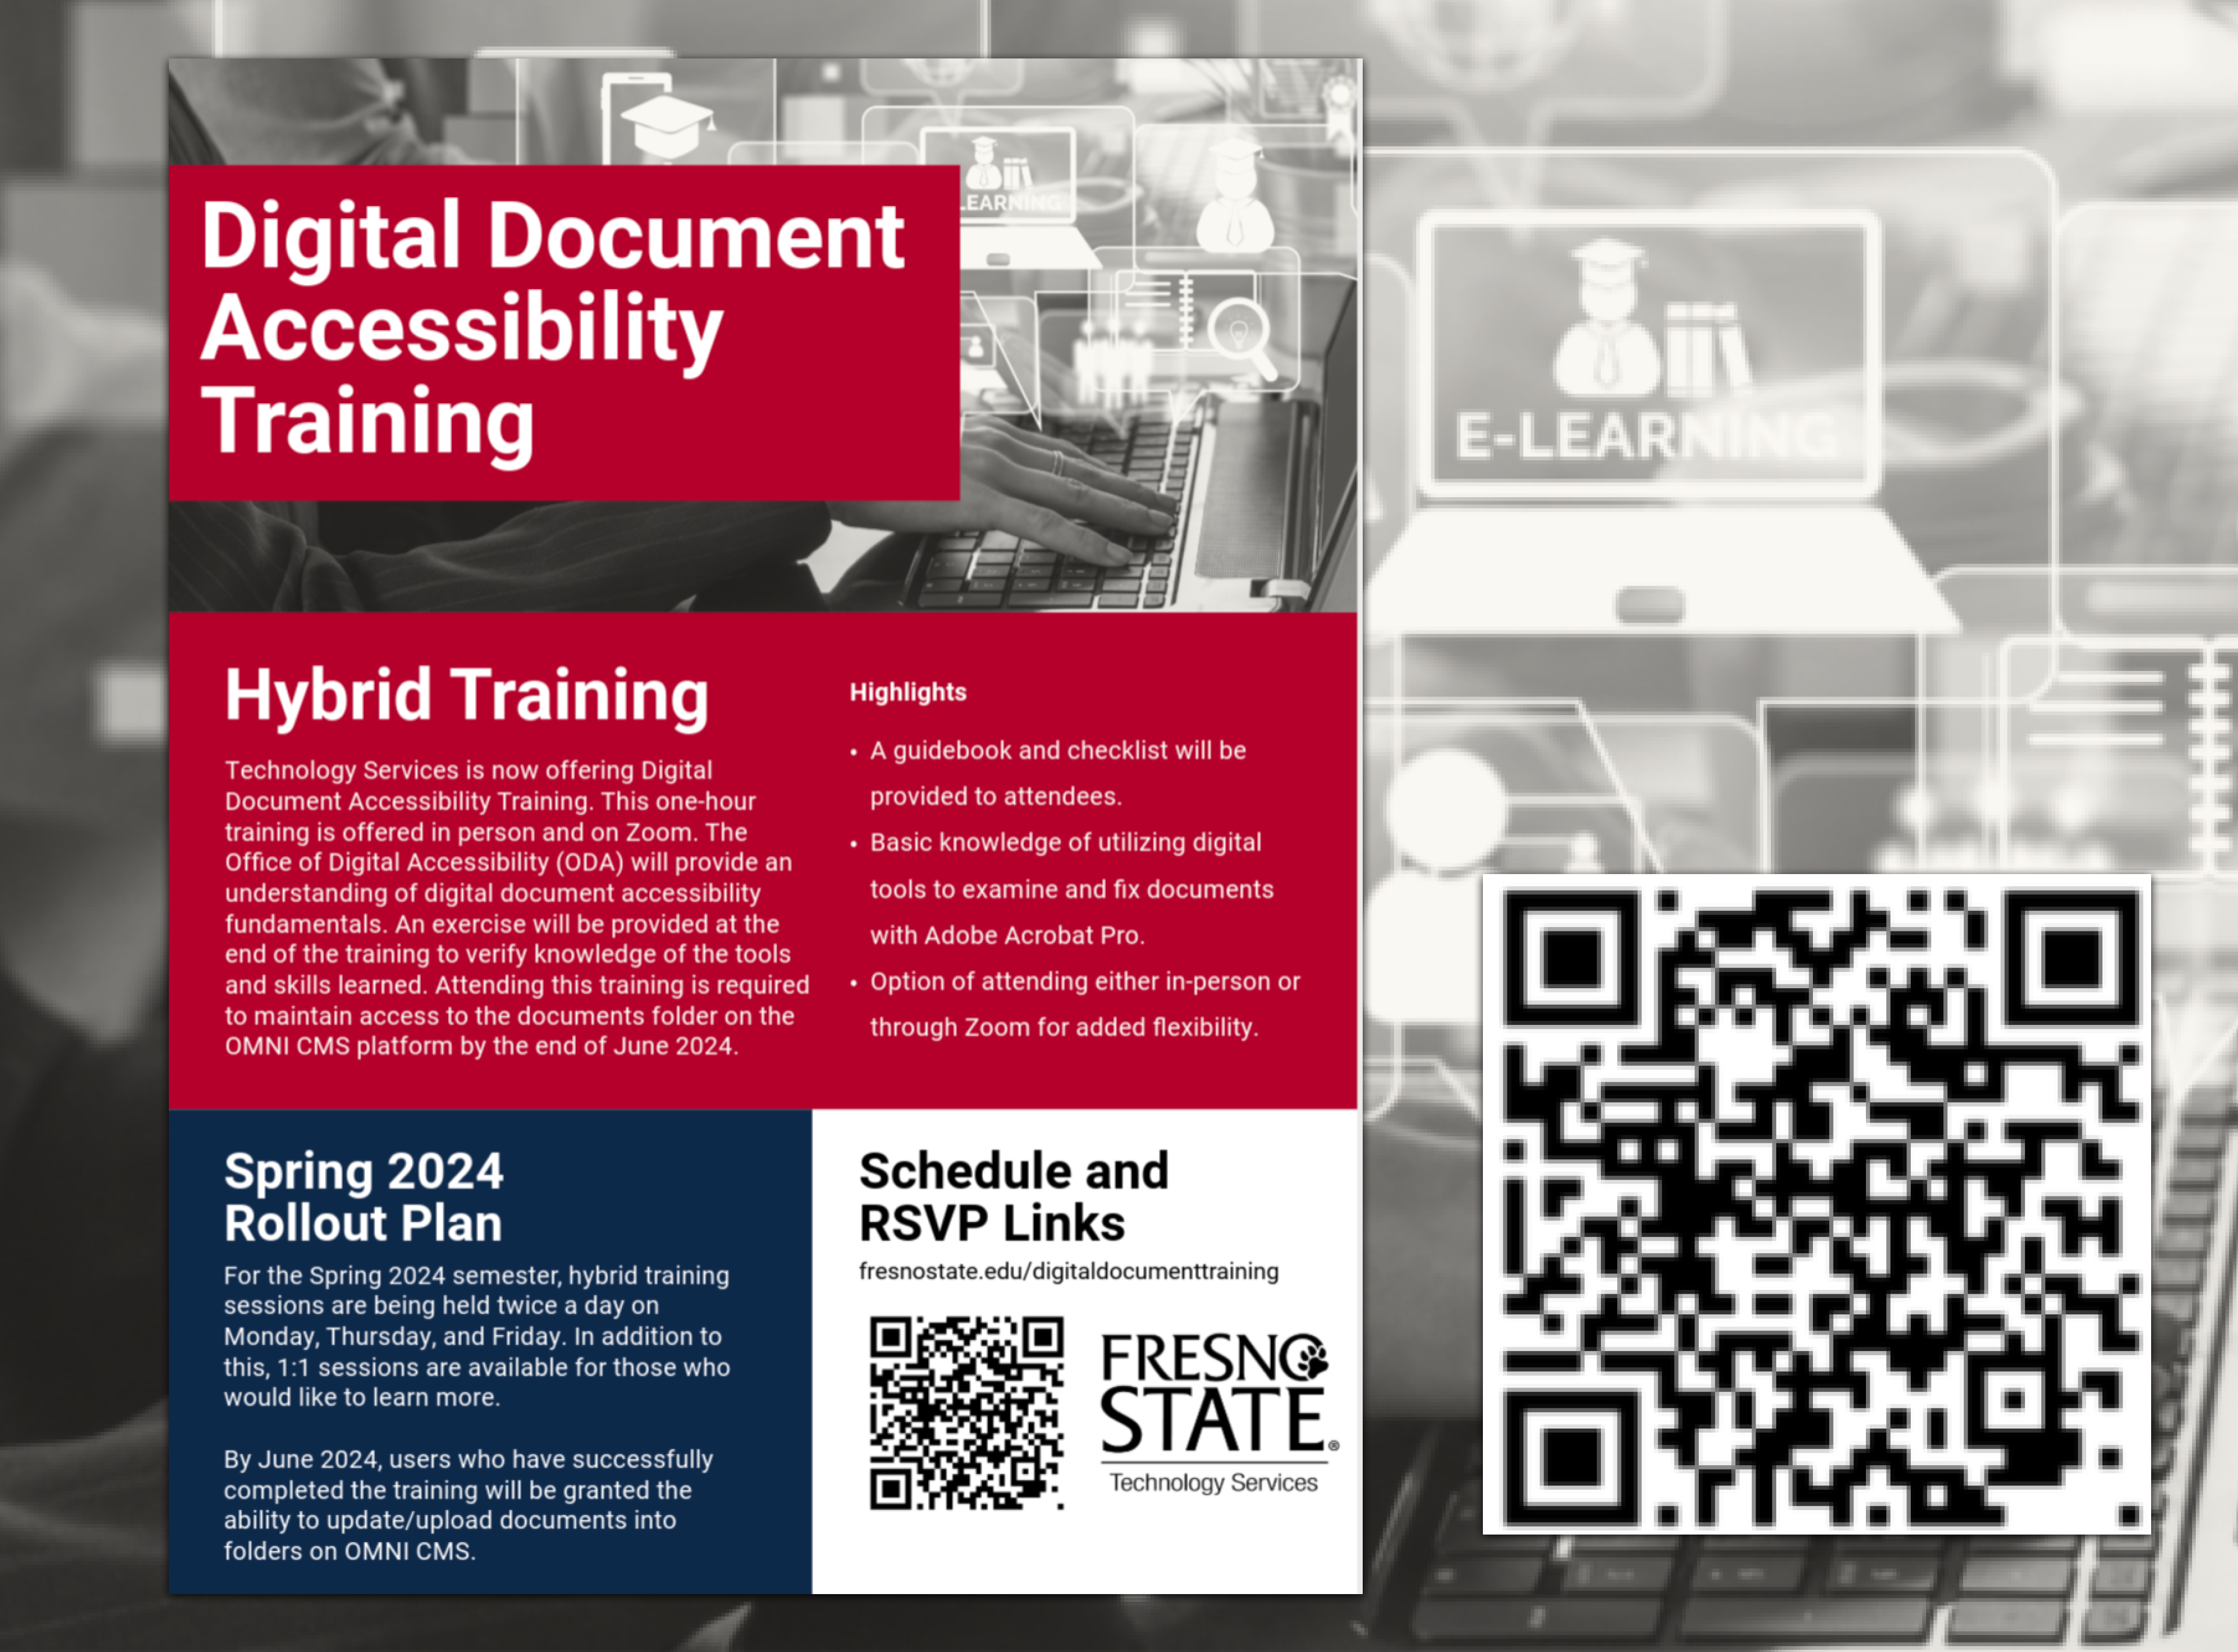 digital document training flyer and qr code visual, see information below